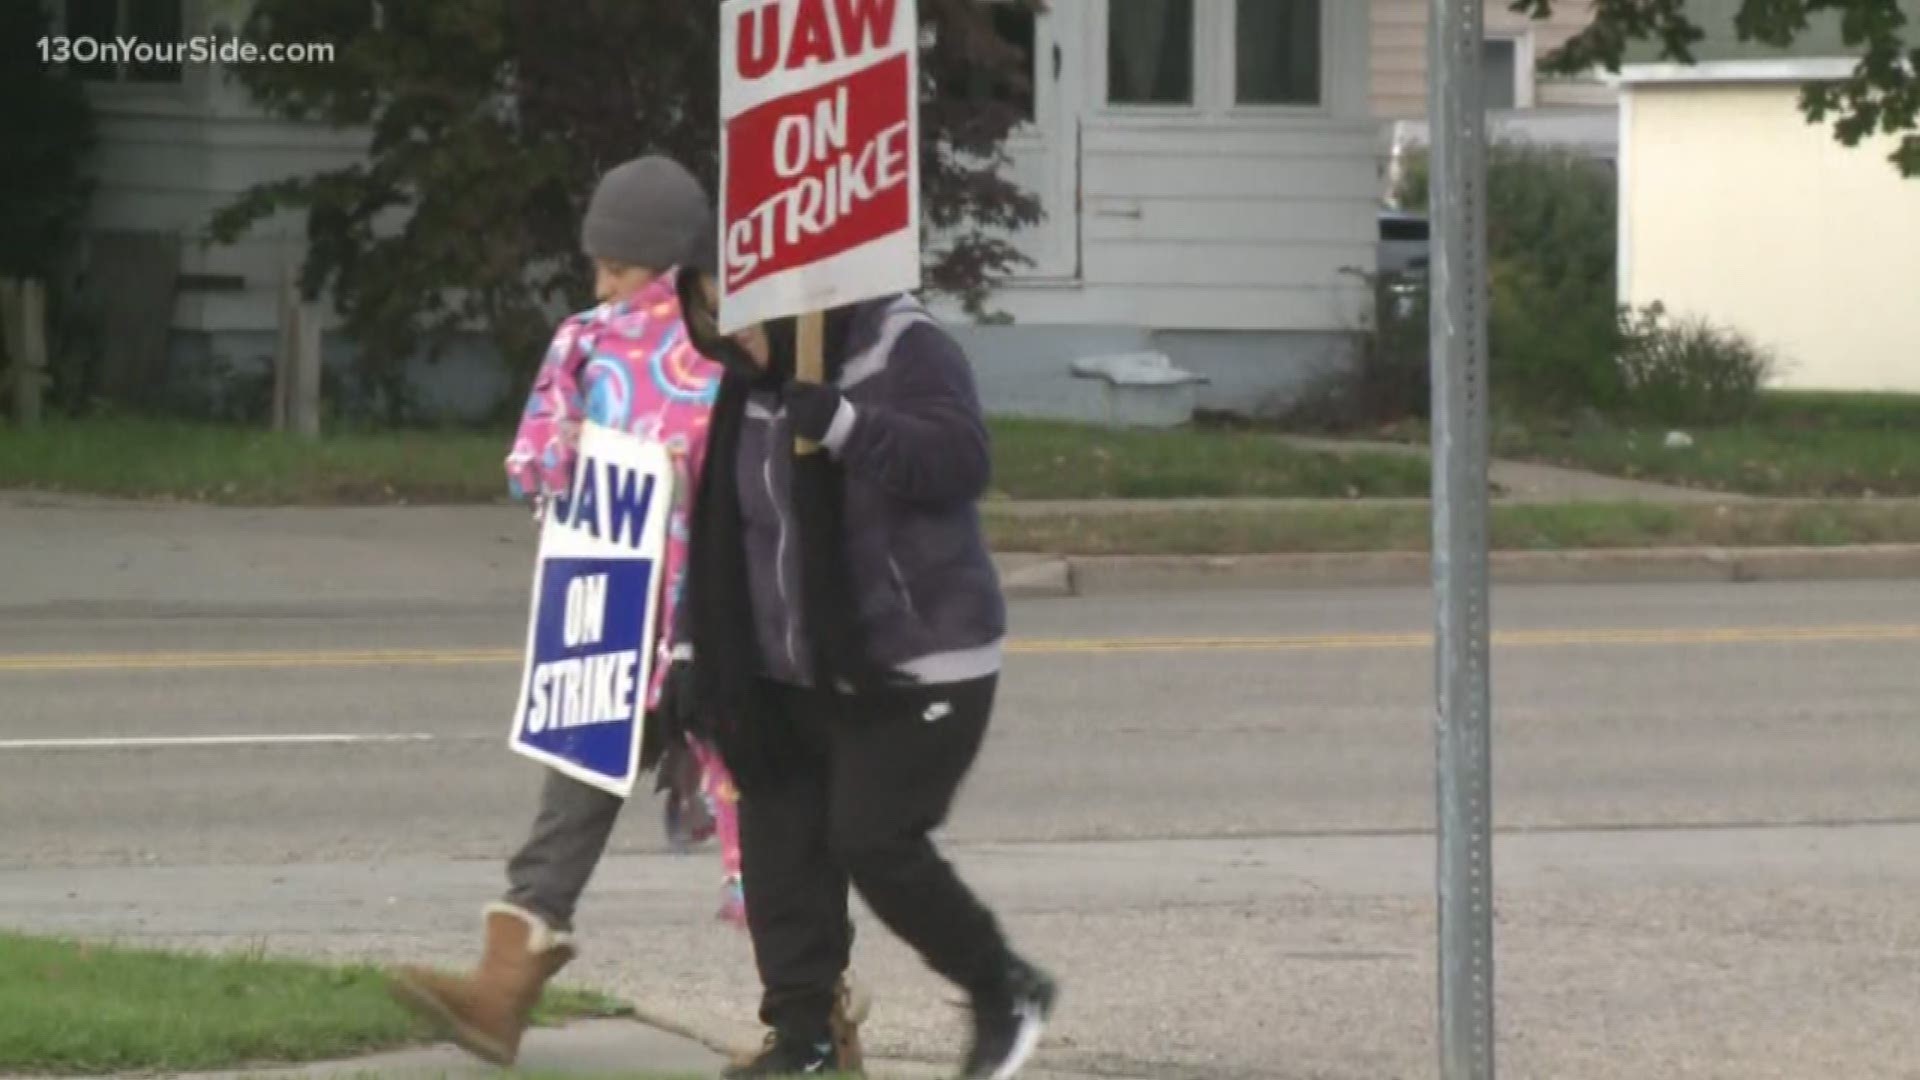 Union leaders approved a tentative contract agreement with GM Thursday, but that doesn't mean the month-long strike is over.